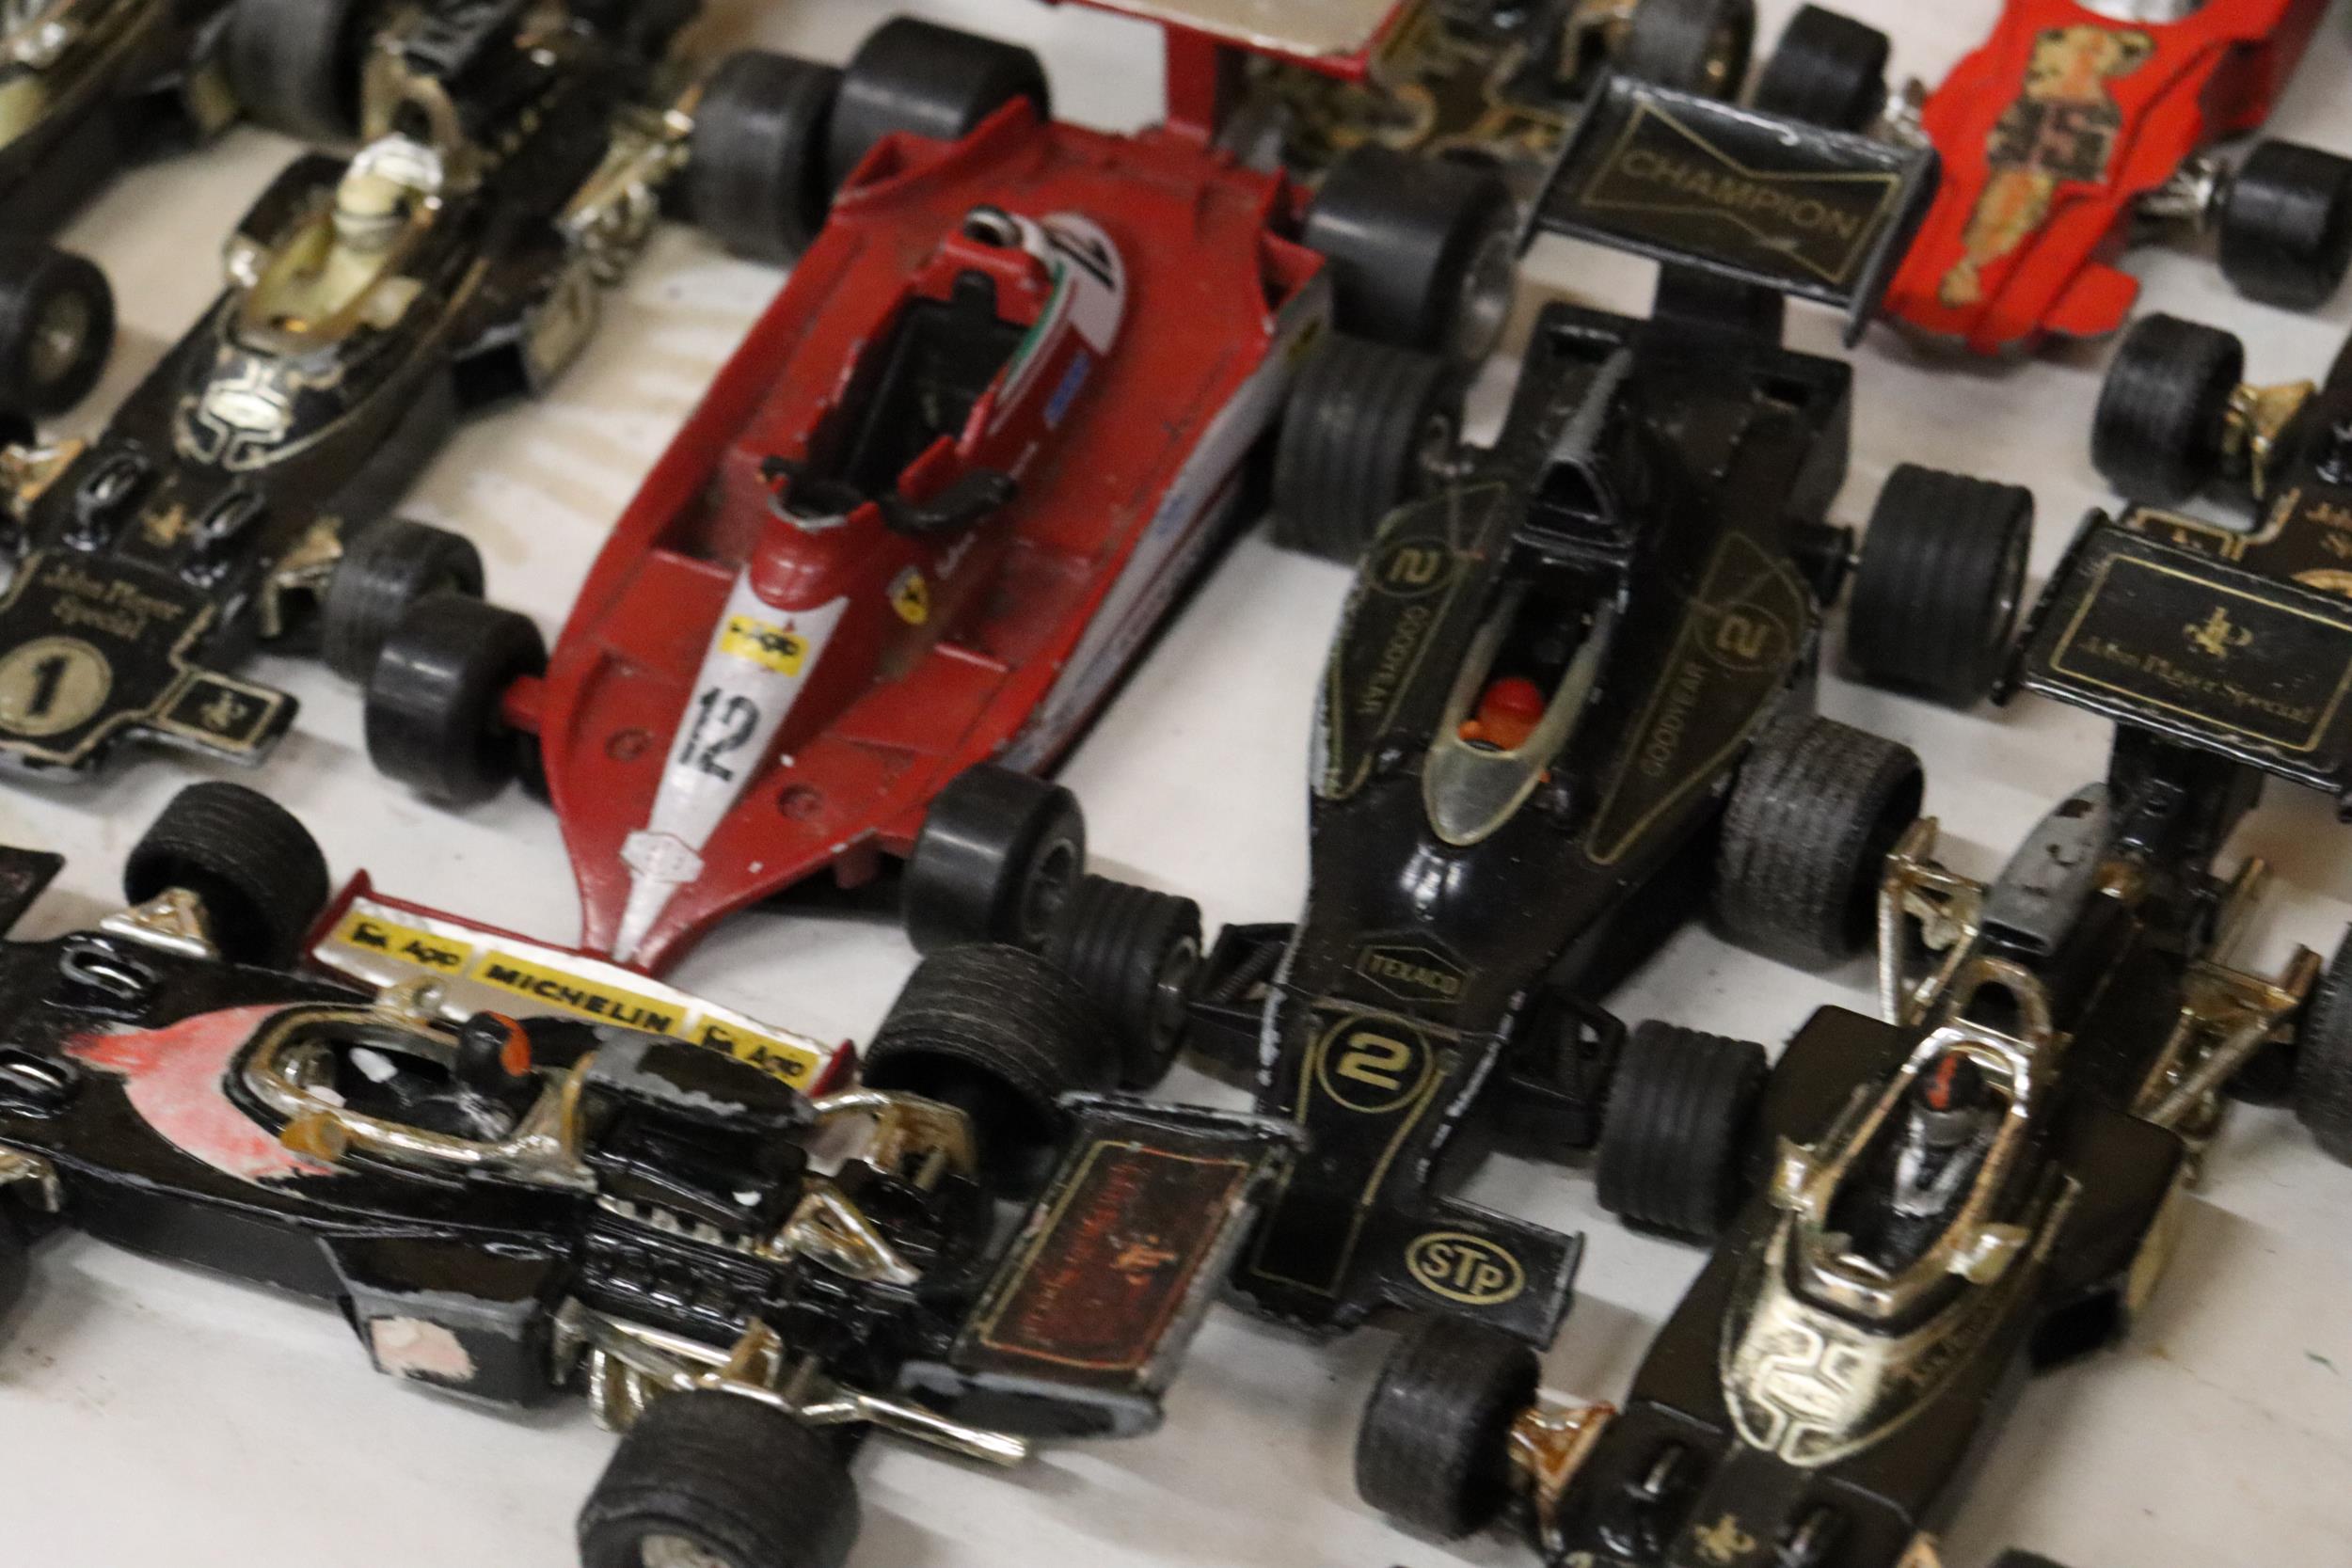 A LARGE QUANTITY OF VINTAGE DIE-CAST CORGI AND MATCHBOX F1 RACING CARS - Image 8 of 9